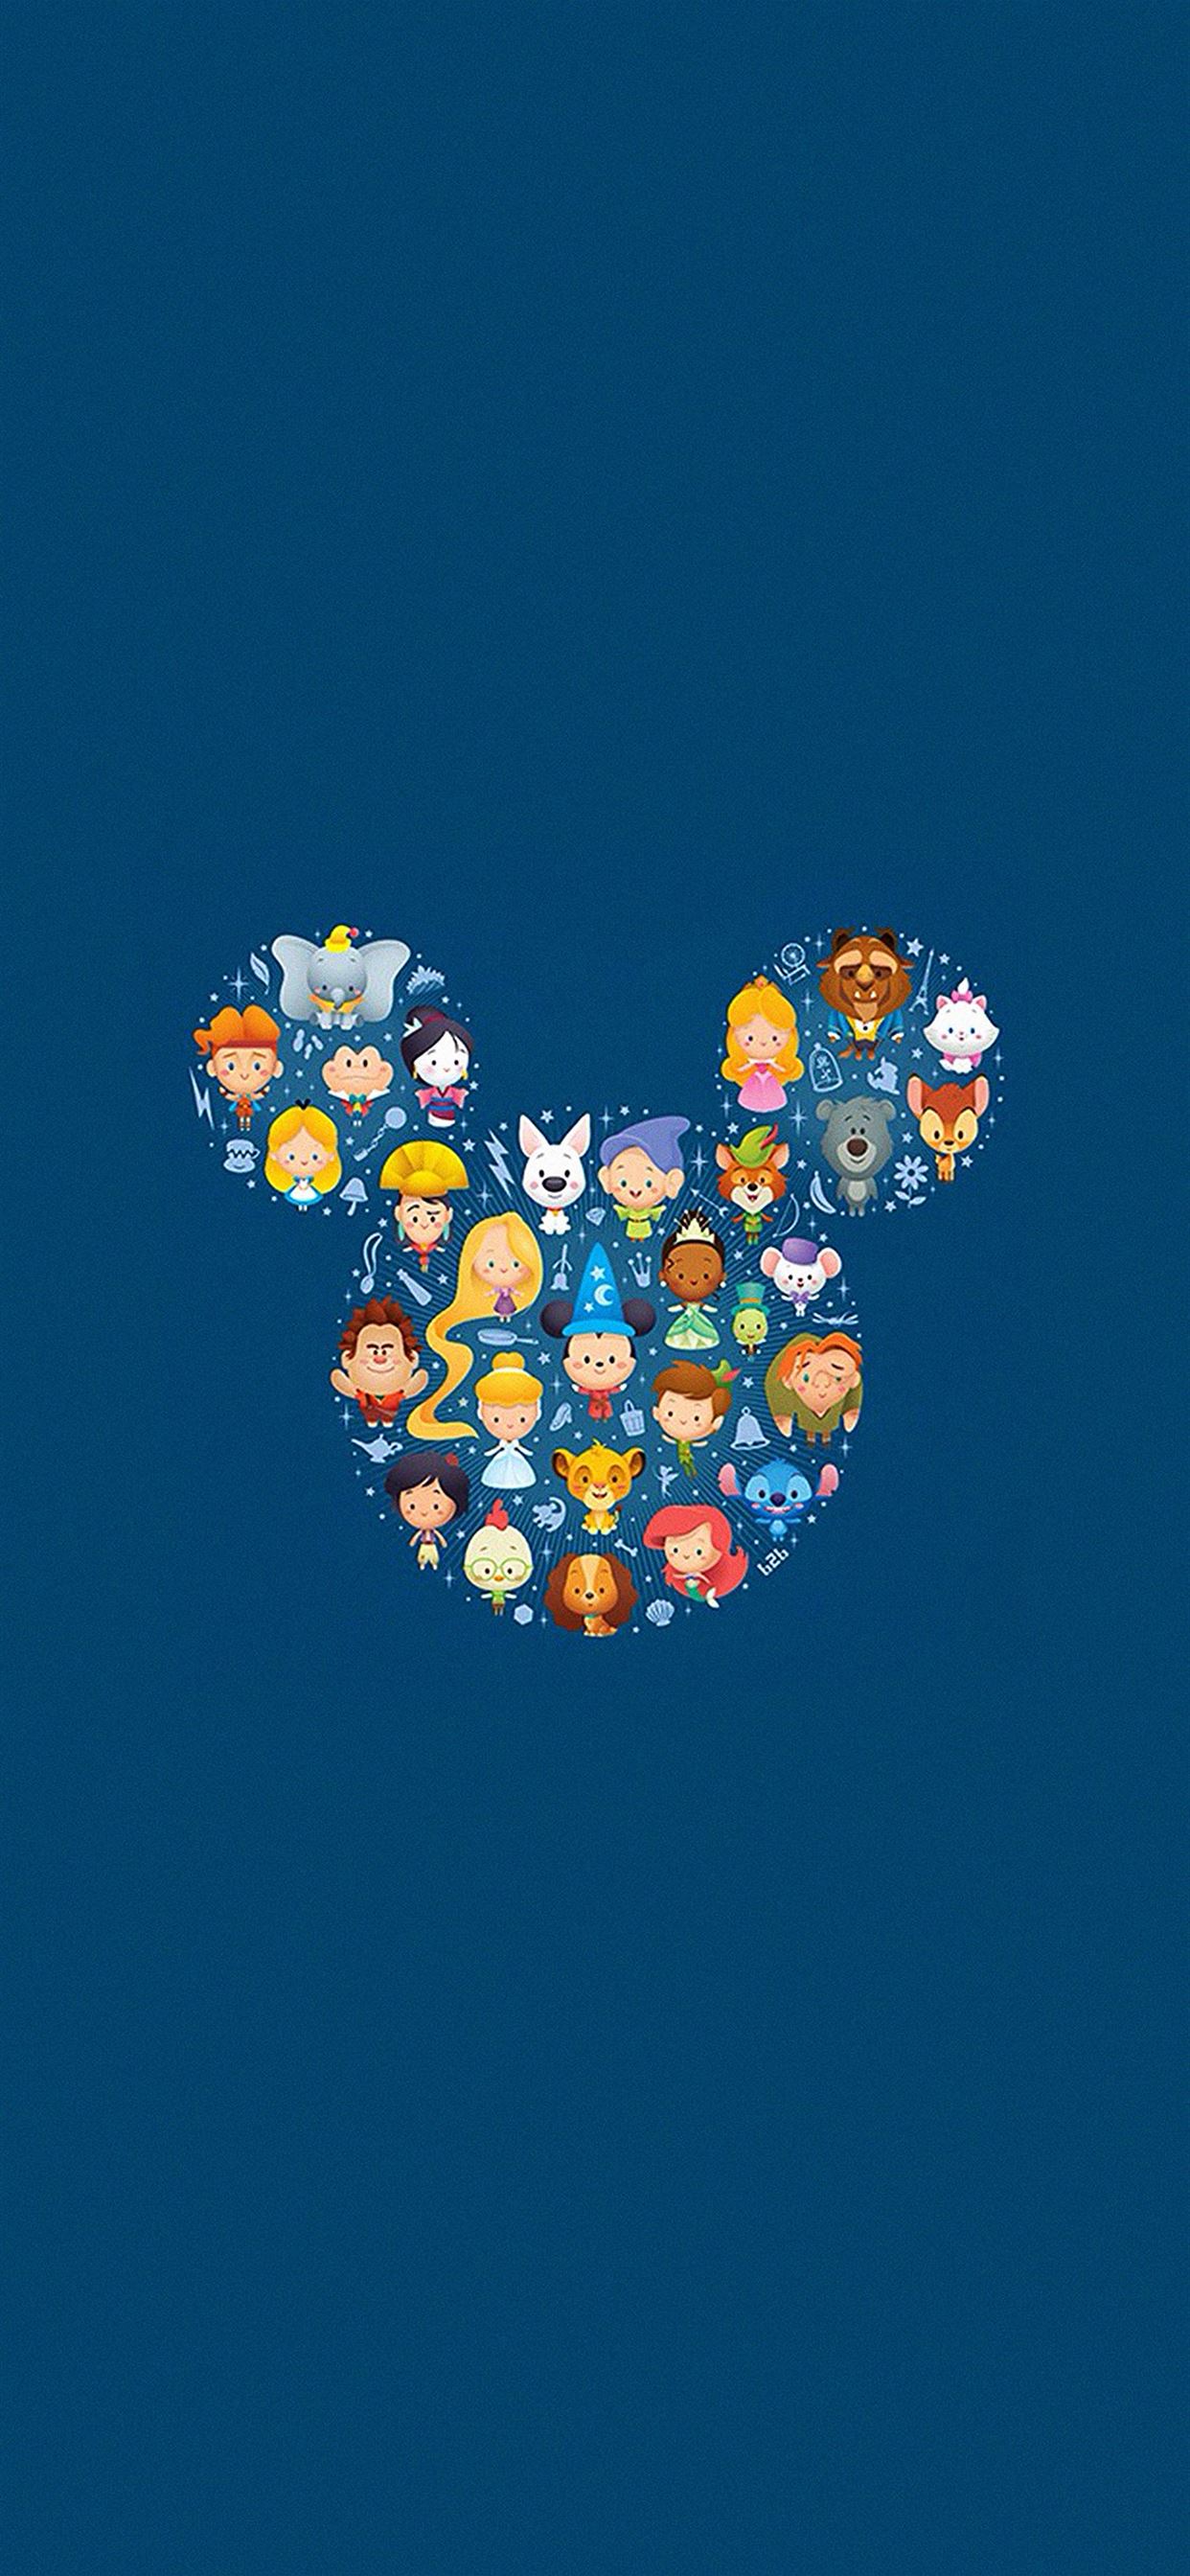 Disney art character cute iPhone X Wallpapers Free Download